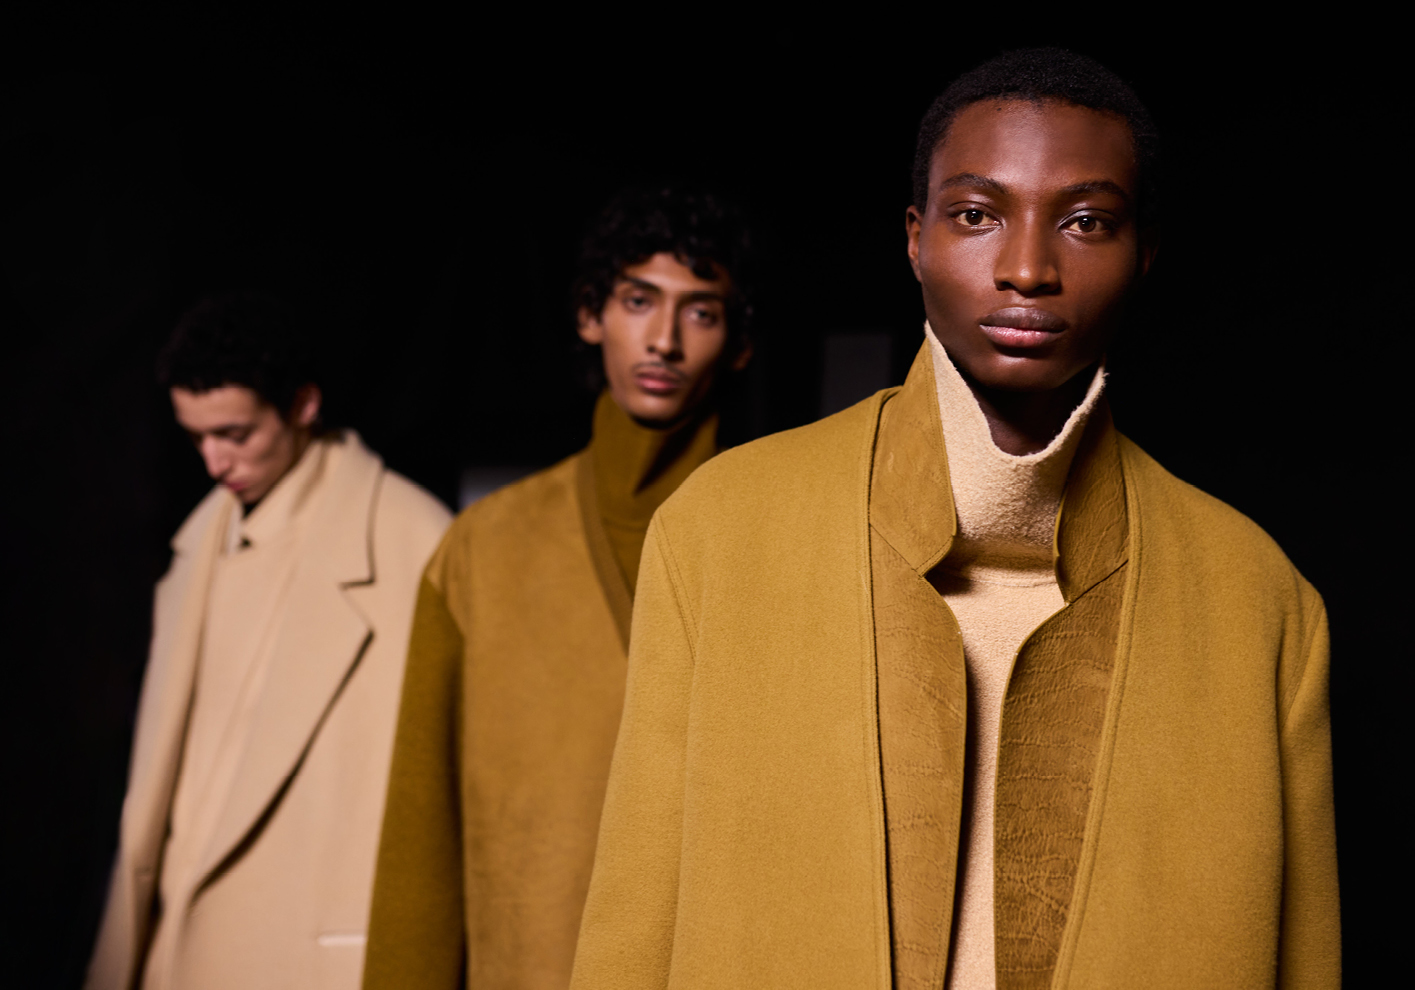 Zegna's Oasi Cashmere collection